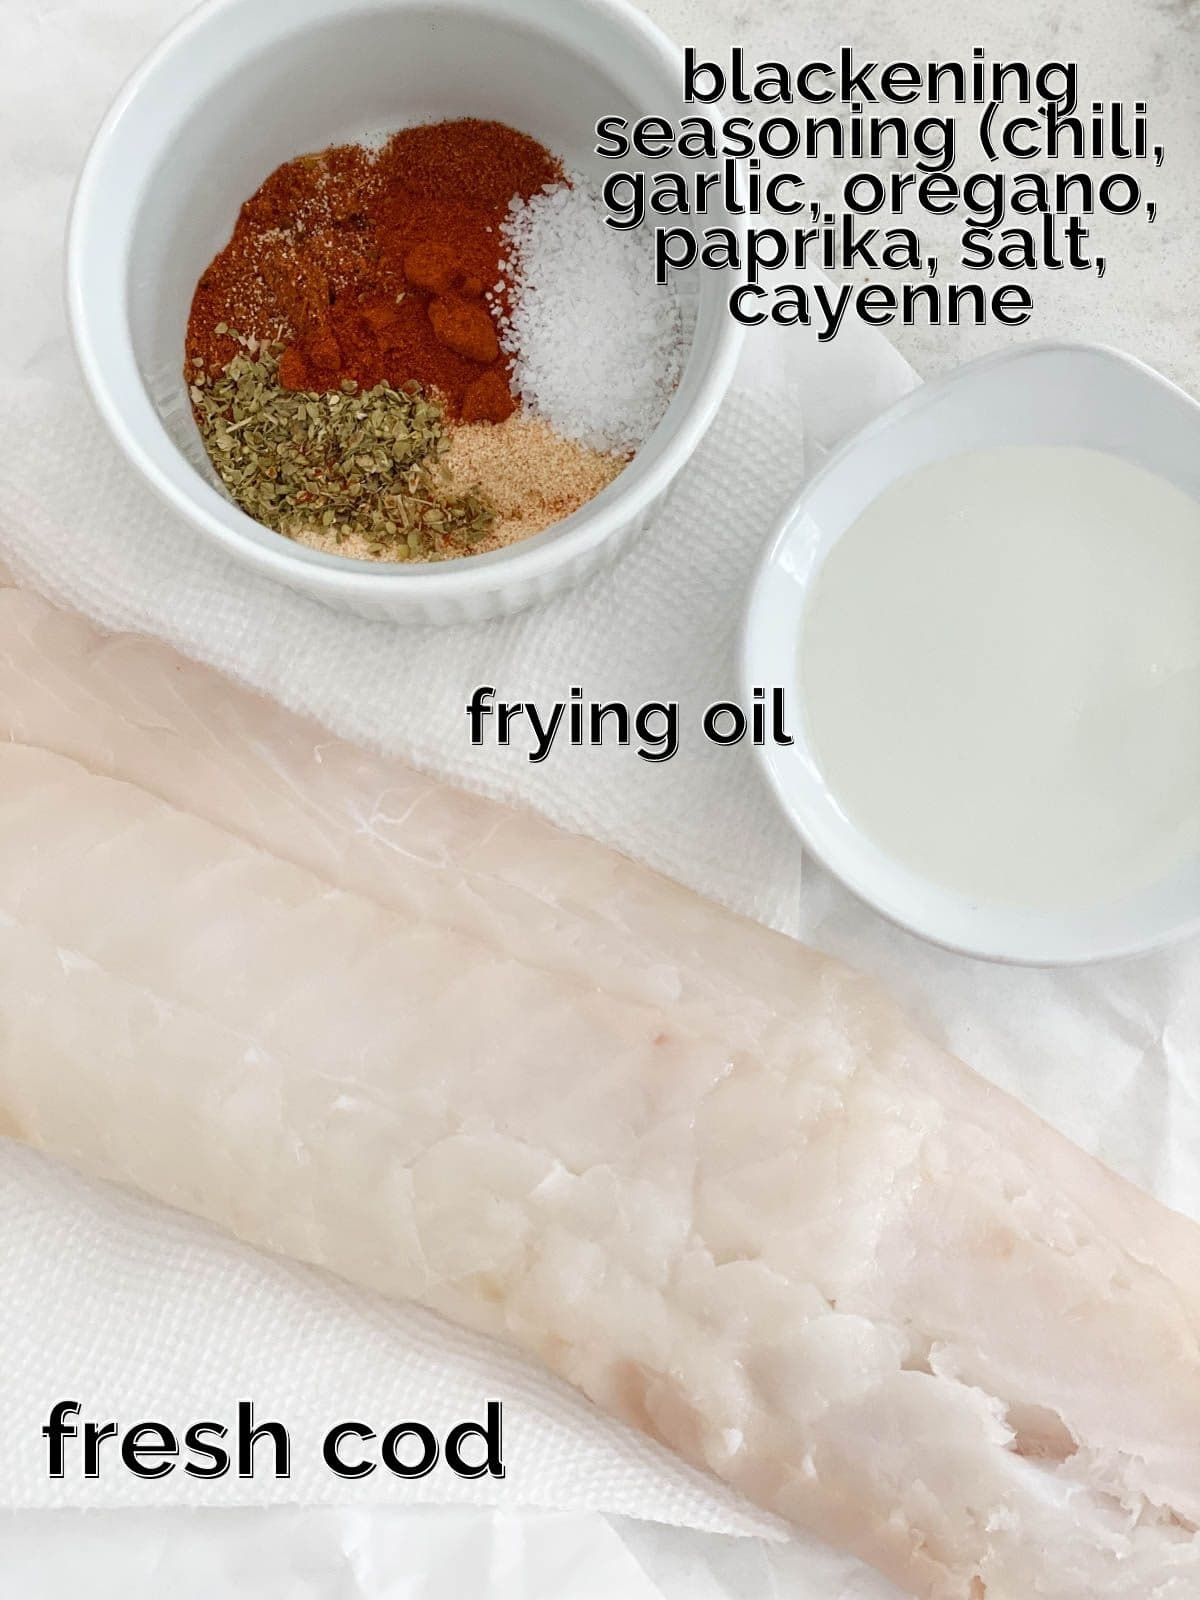 Spices, cod, and oil on a white table